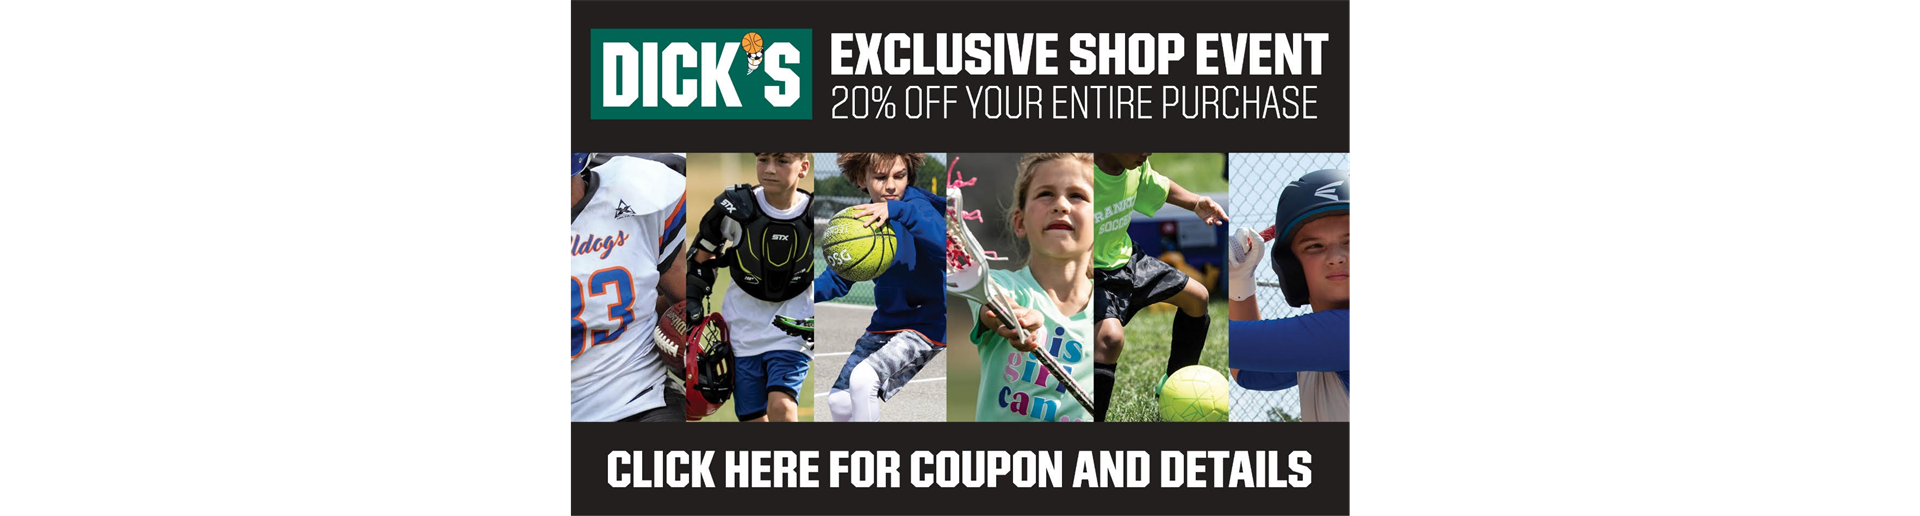 Save 20% at Dick's Sporting Goods